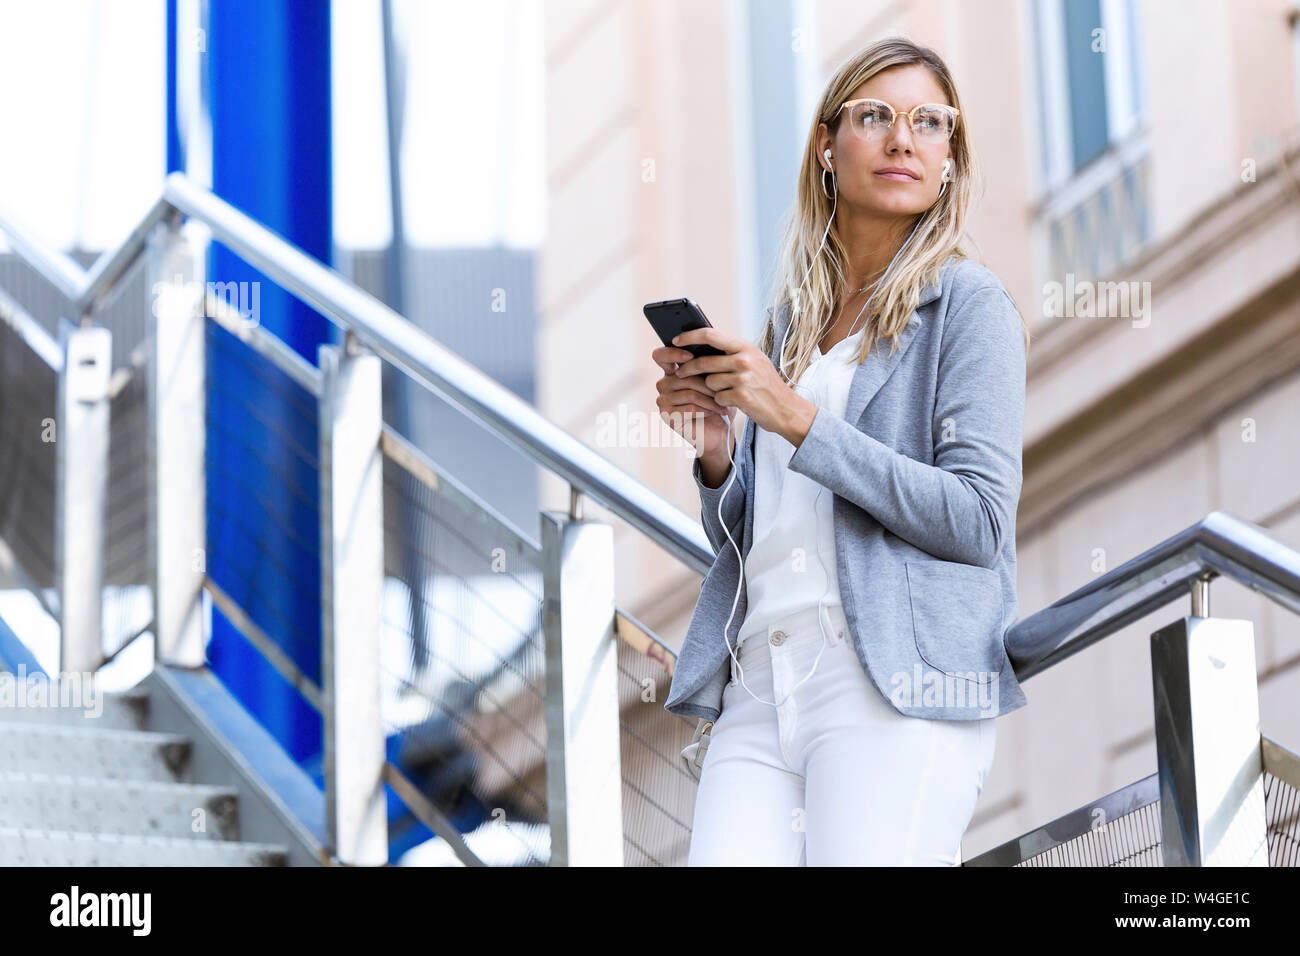 Young businesswoman texting with her mobile phone on stairs Stock Photo